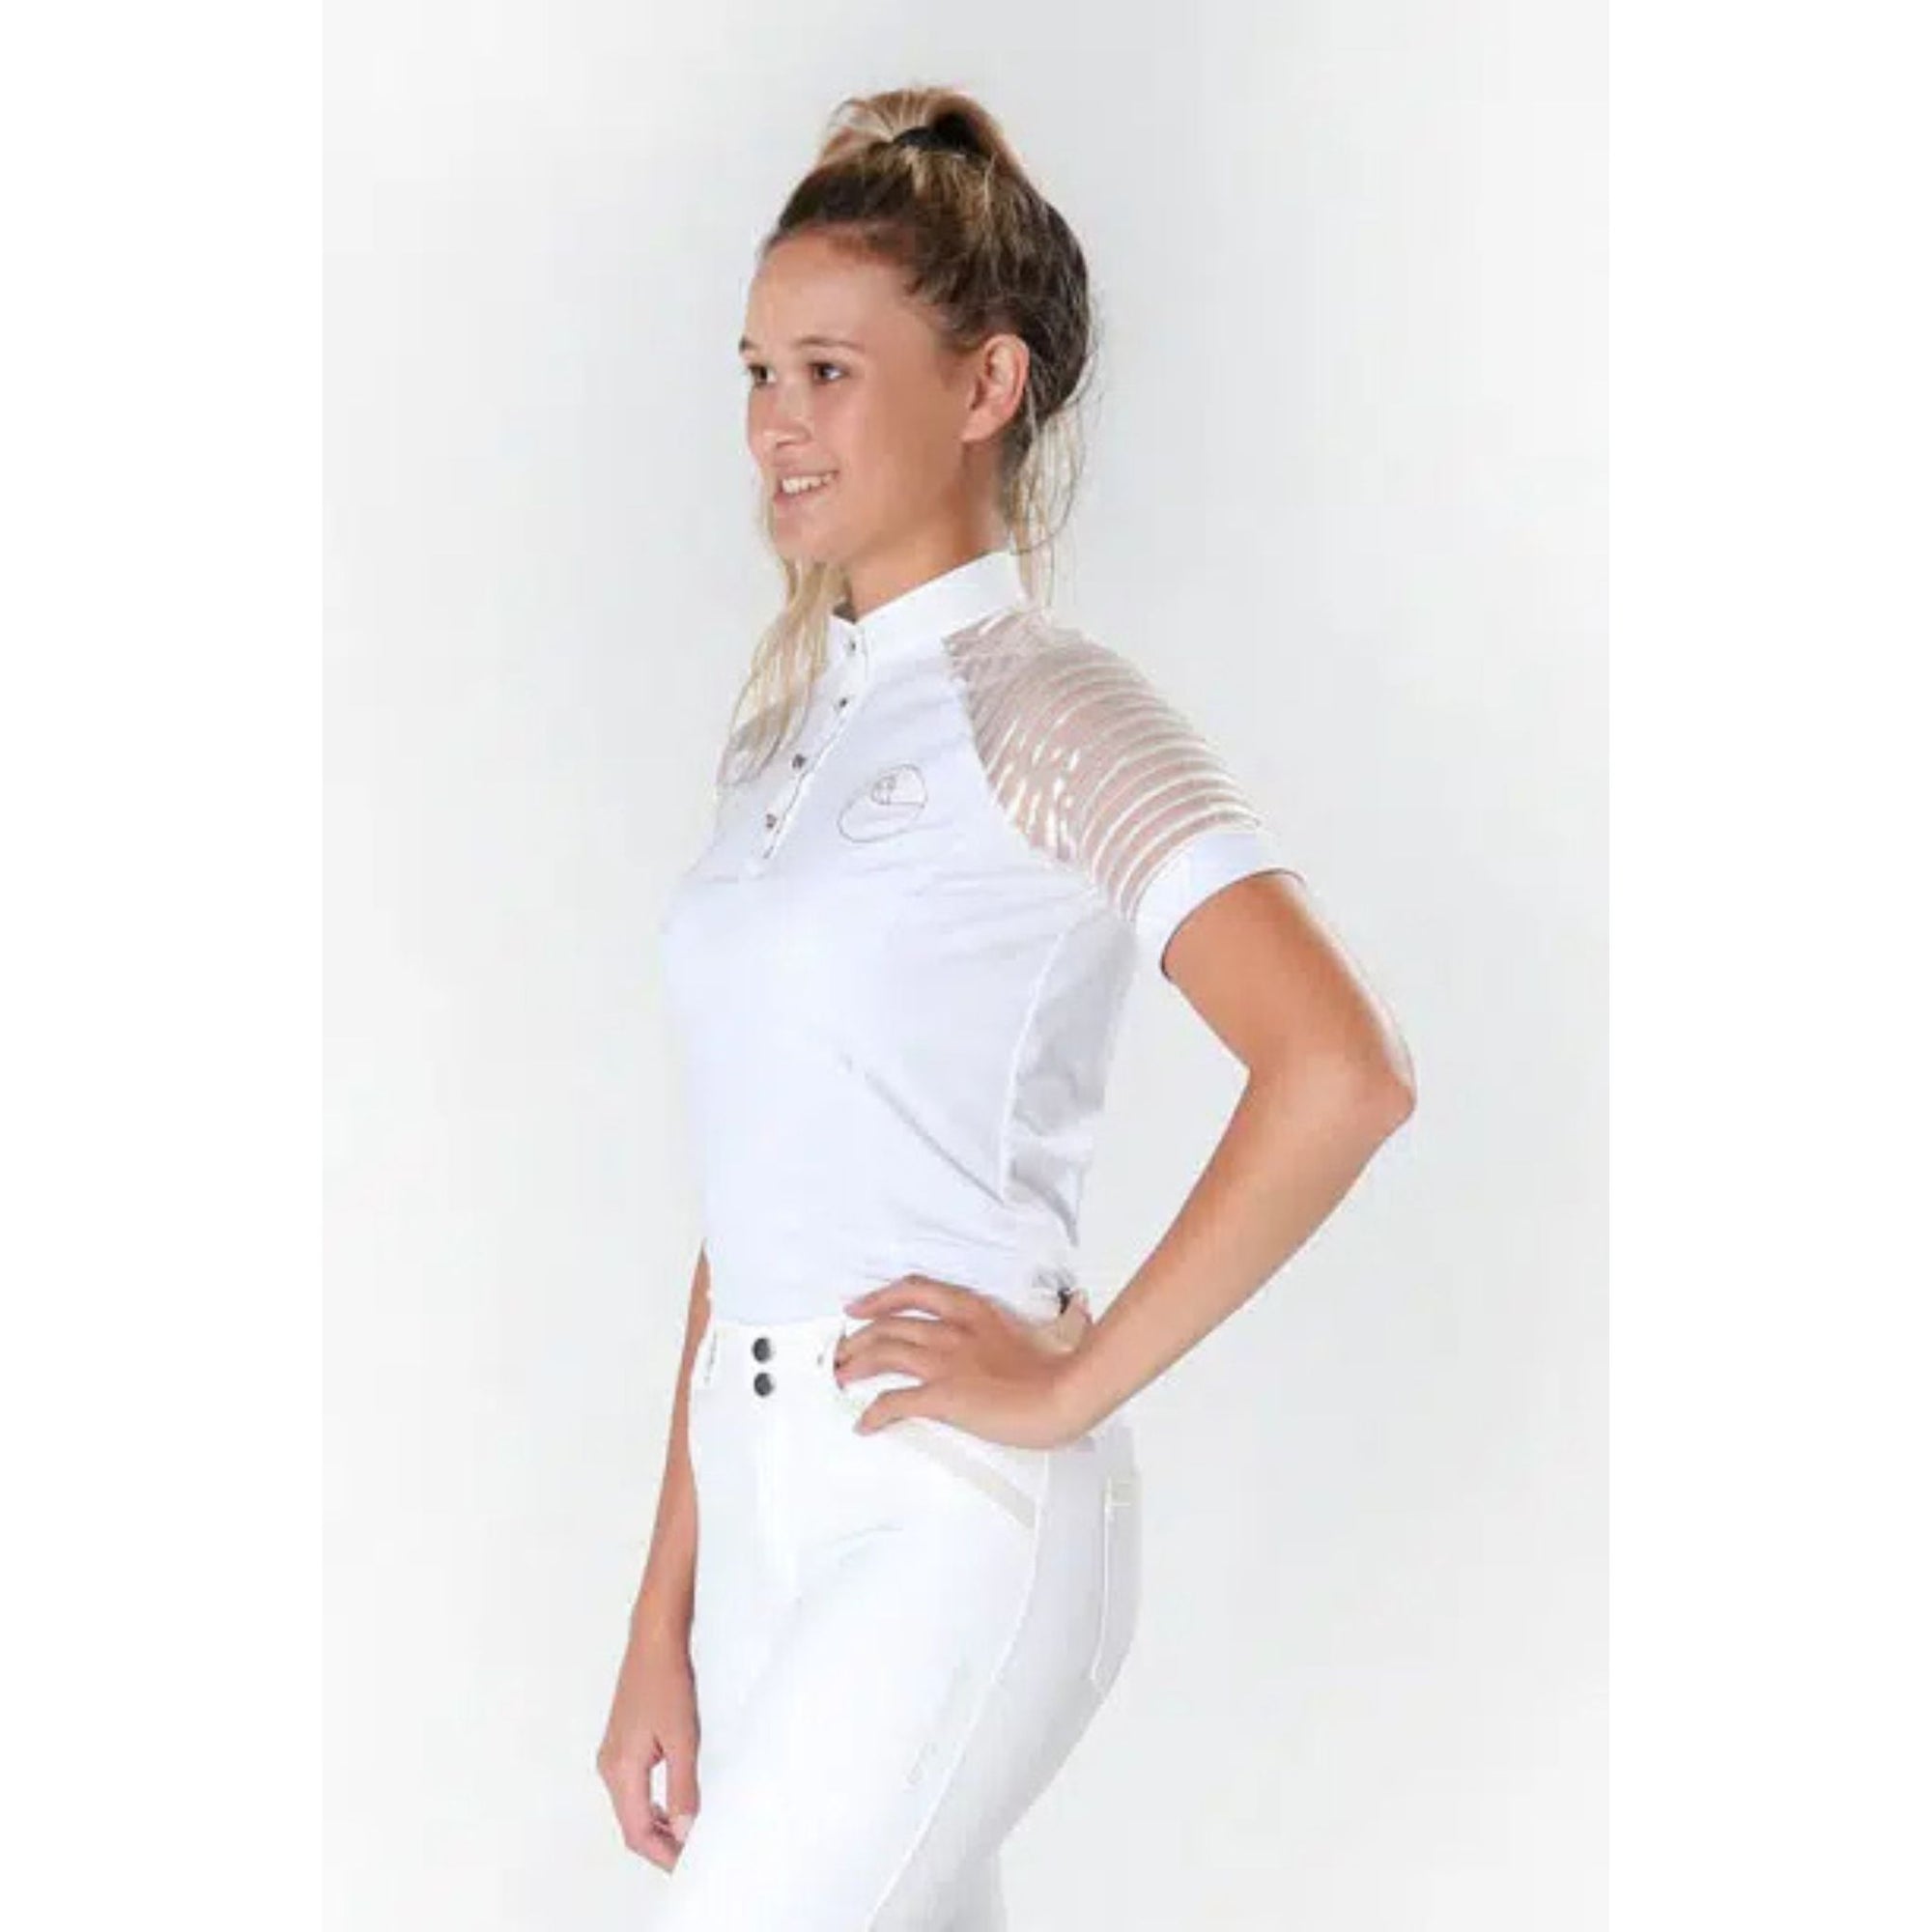 Lady wearing white show shirt with lace sleeves, white collar and cuffs.